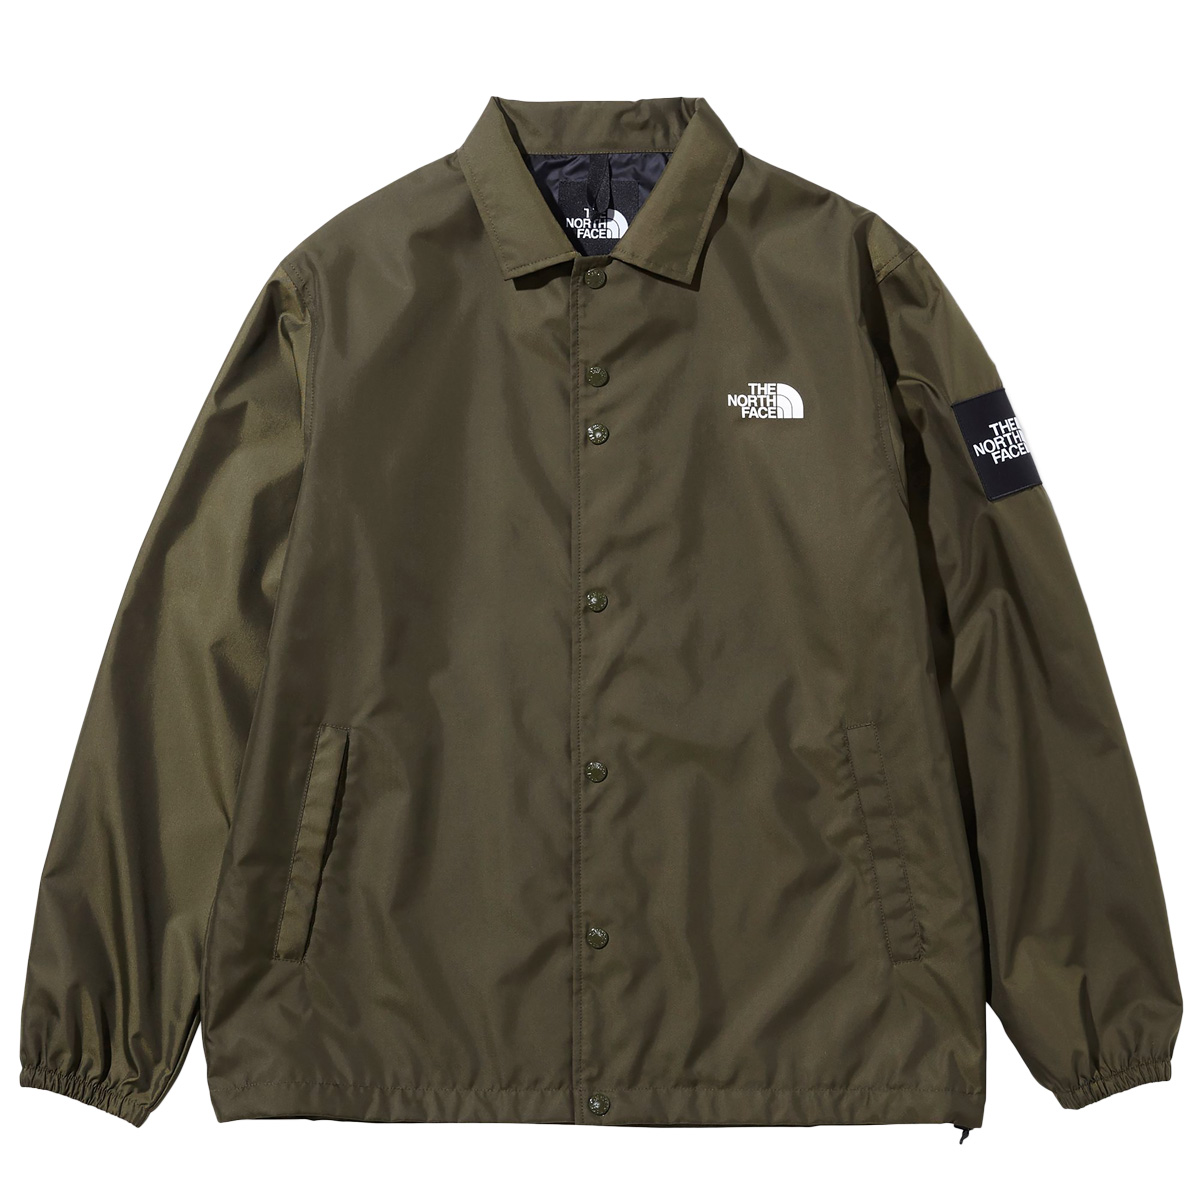 【THE NORTH FACE】(ノースフェイス) The Coach Jacket / ザ 